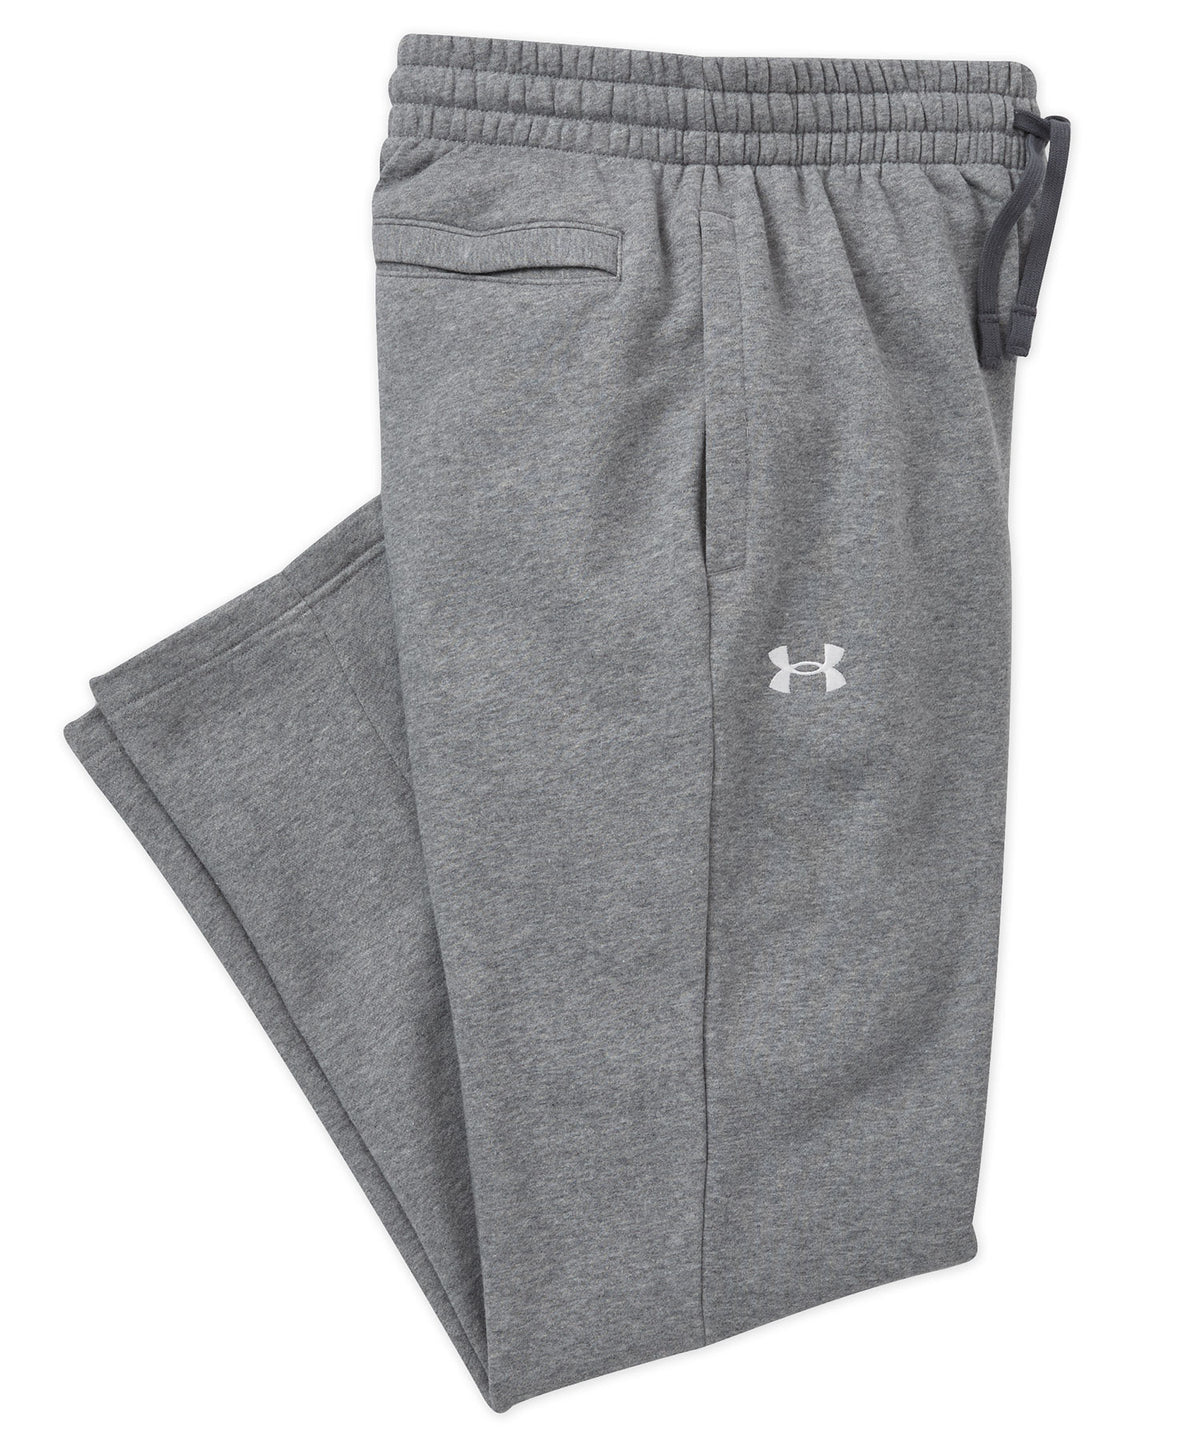 Under Armour Rival Cotton Sweat Pants Grey Heather 1248351-025 at